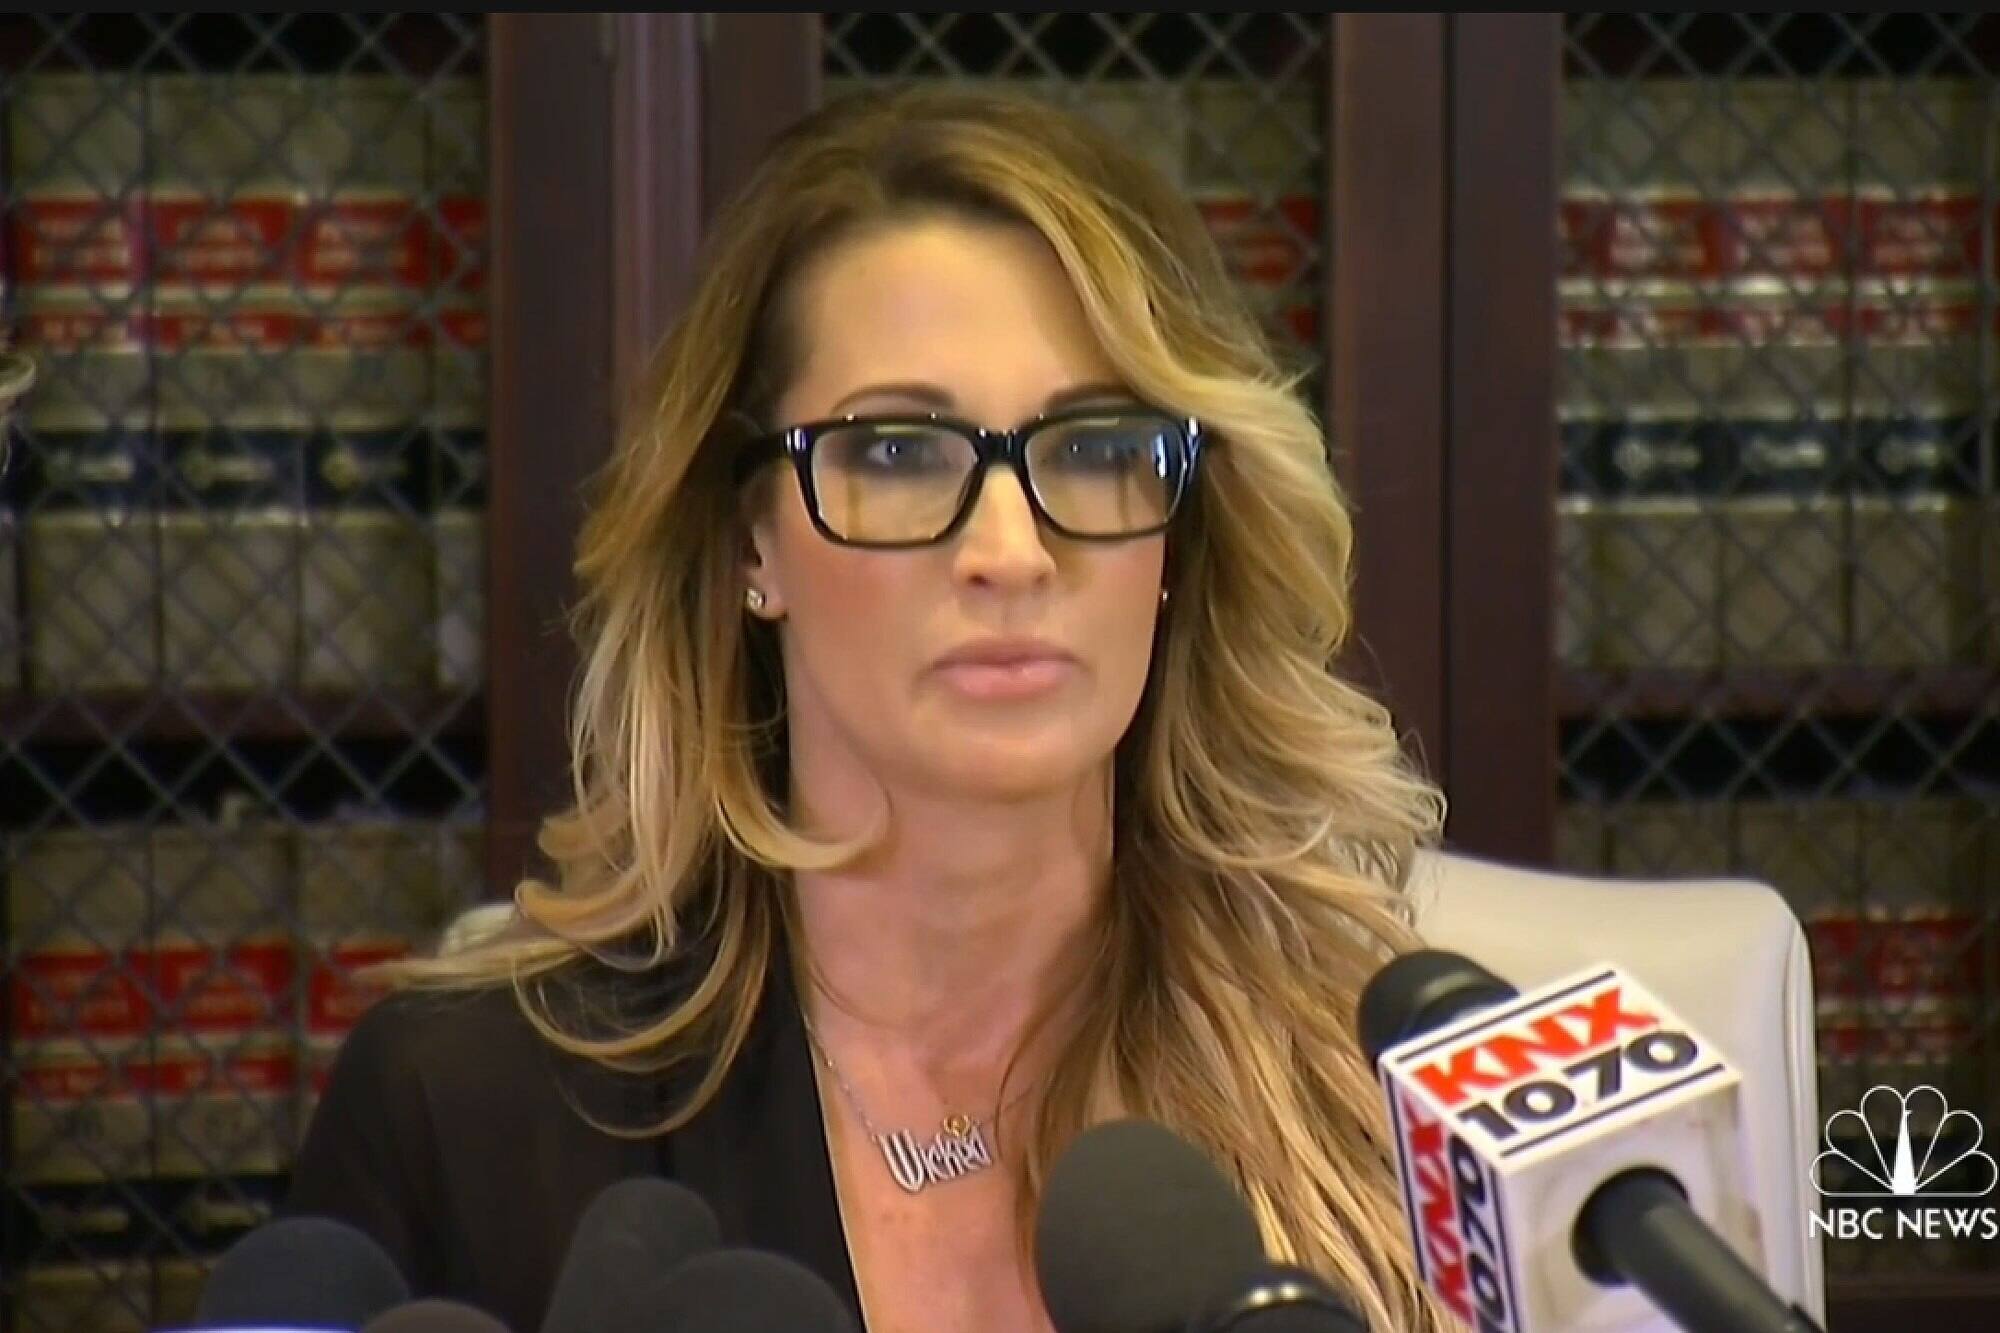 Adult Film Star Jessica Drake Accuses Donald Trump of Sexual Misconduct